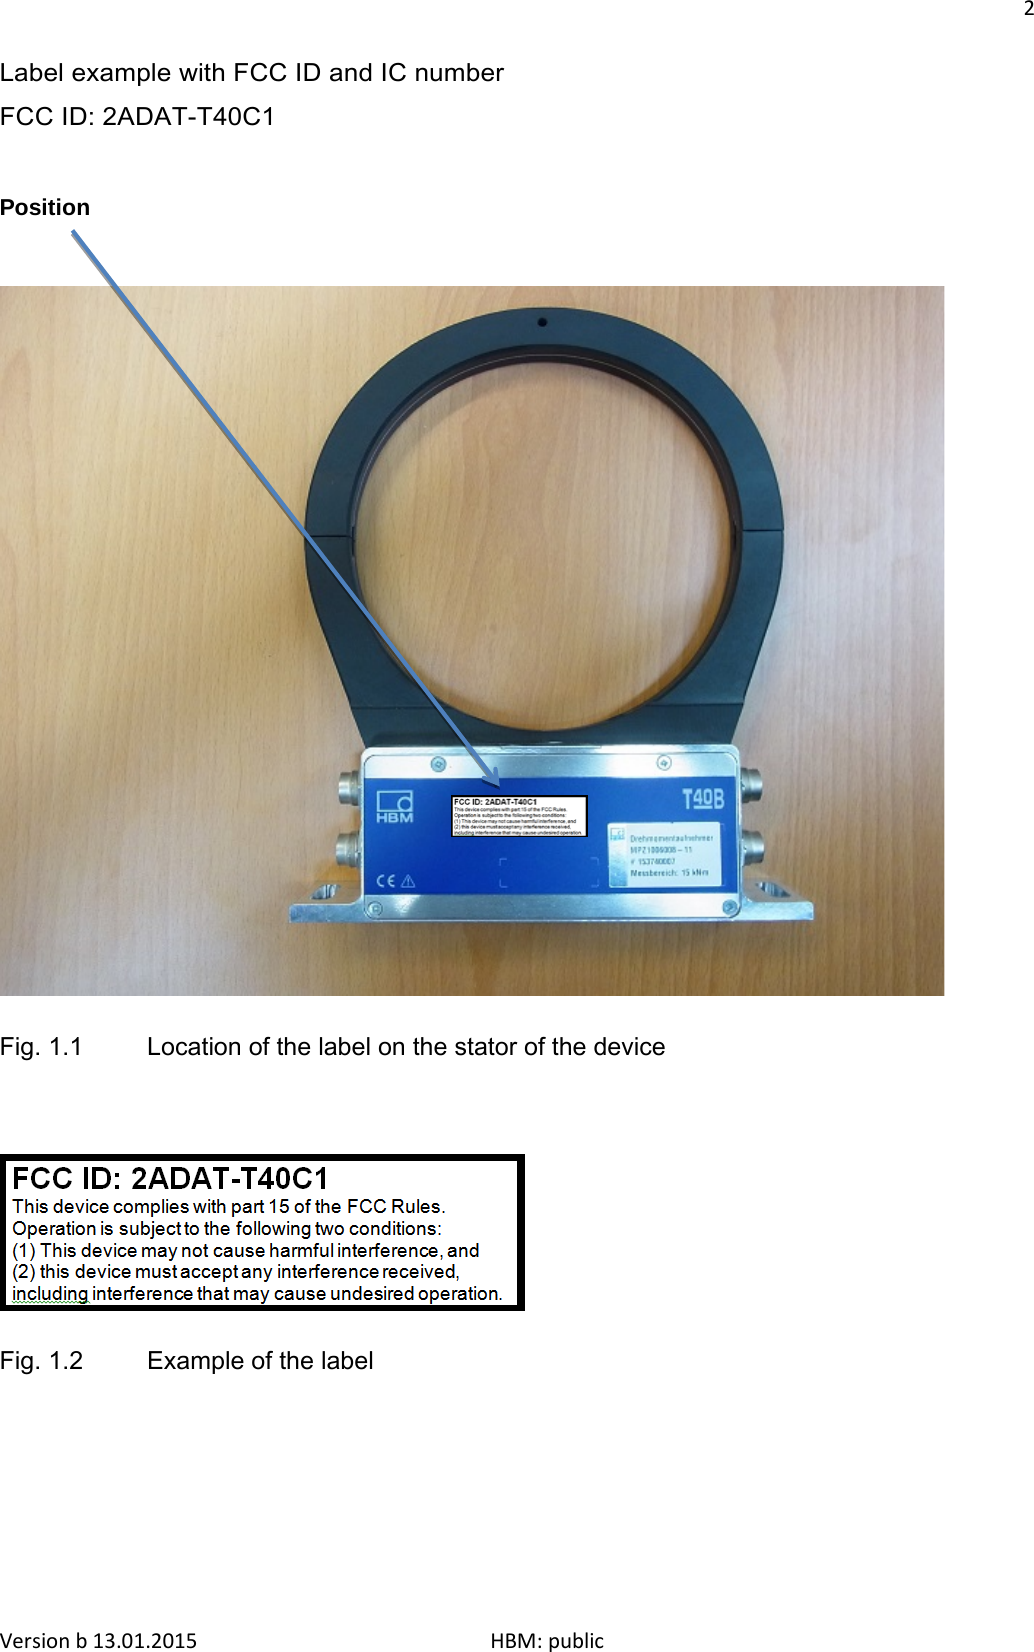 2  Label example with FCC ID and IC number FCC ID: 2ADAT-T40C1    Position                                     Fig. 1.1 Location of the label on the stator of the device     Fig. 1.2 Example of the labelVersion b 13.01.2015                              HBM: public 